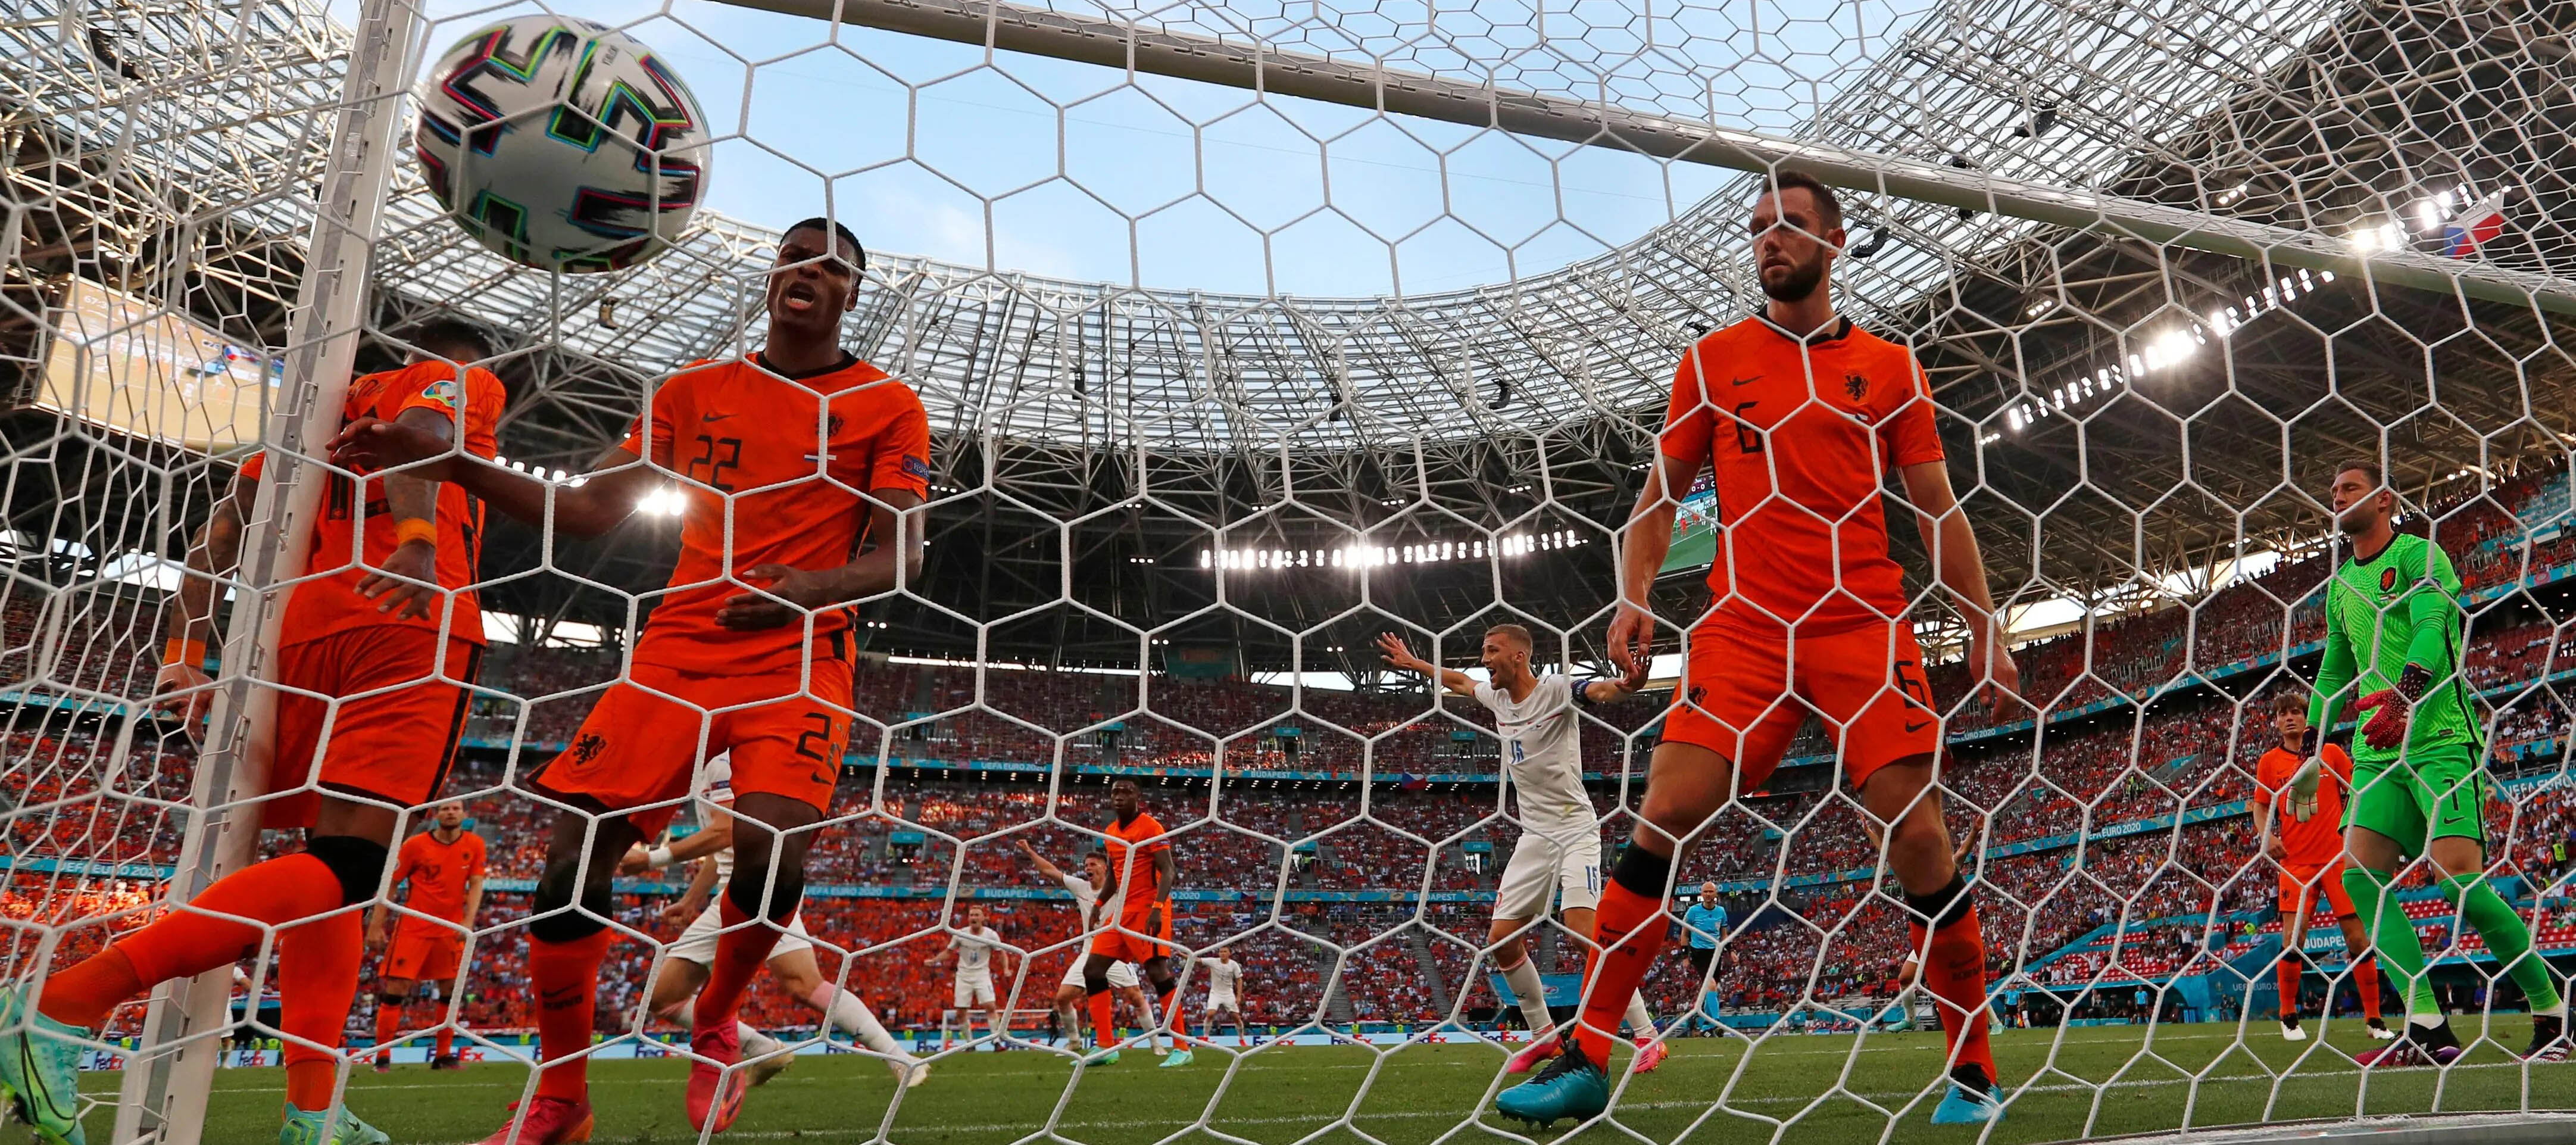 Top UEFA Nations League Matches to Bet On Netherlands vs Belgium Highlights Friday Action